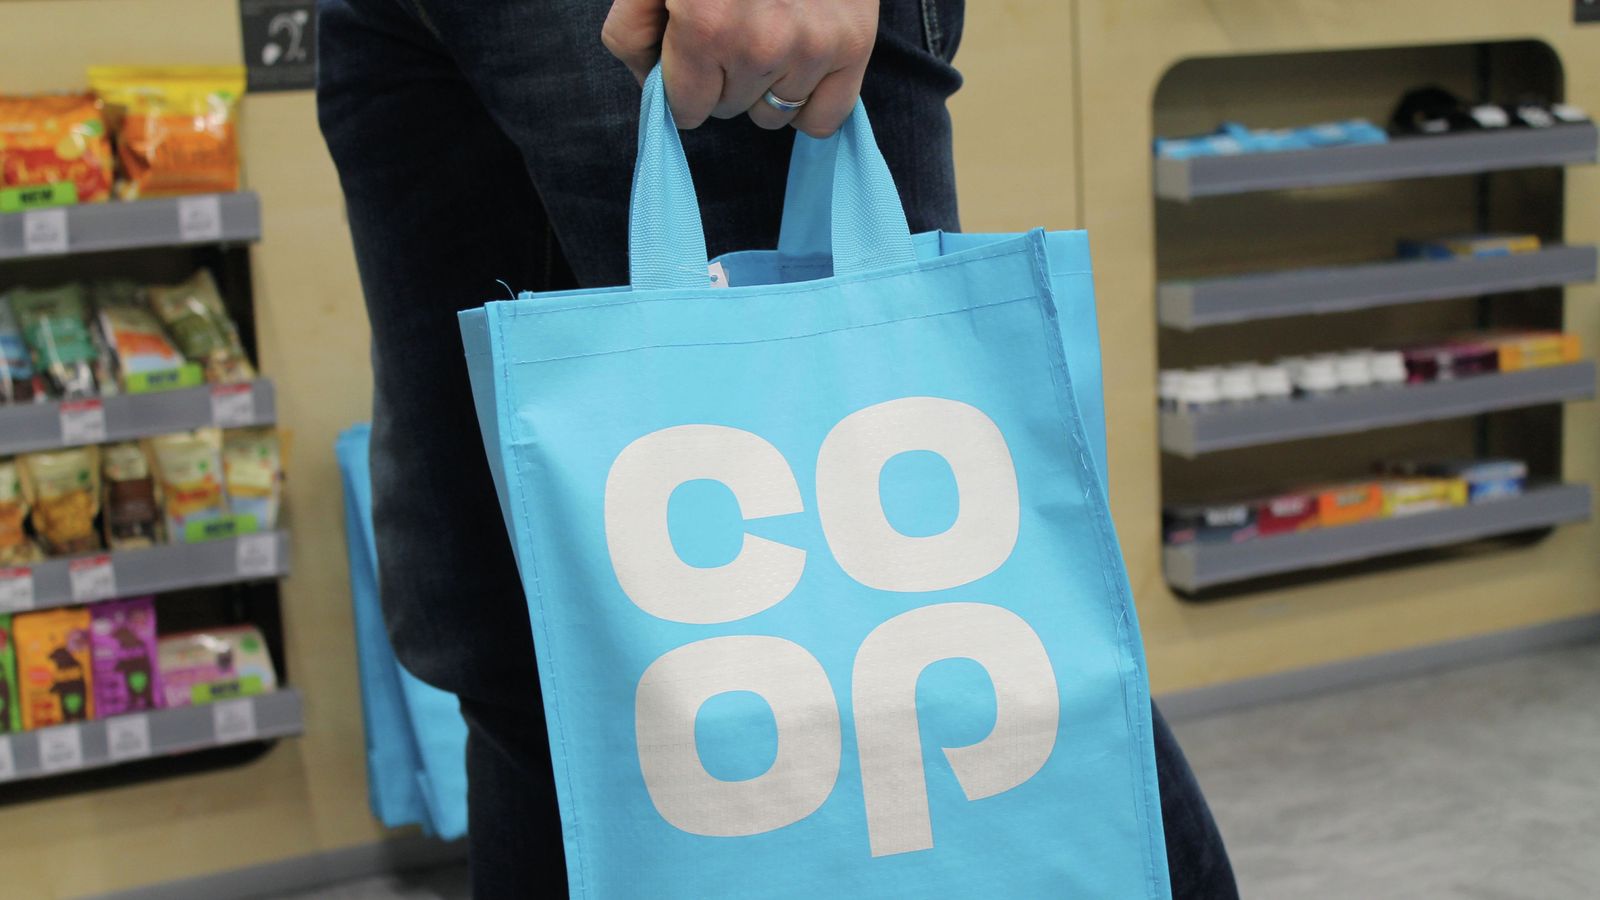 Co-op reports full-year profit after cost-cutting and sale of petrol forecourt business to Asda